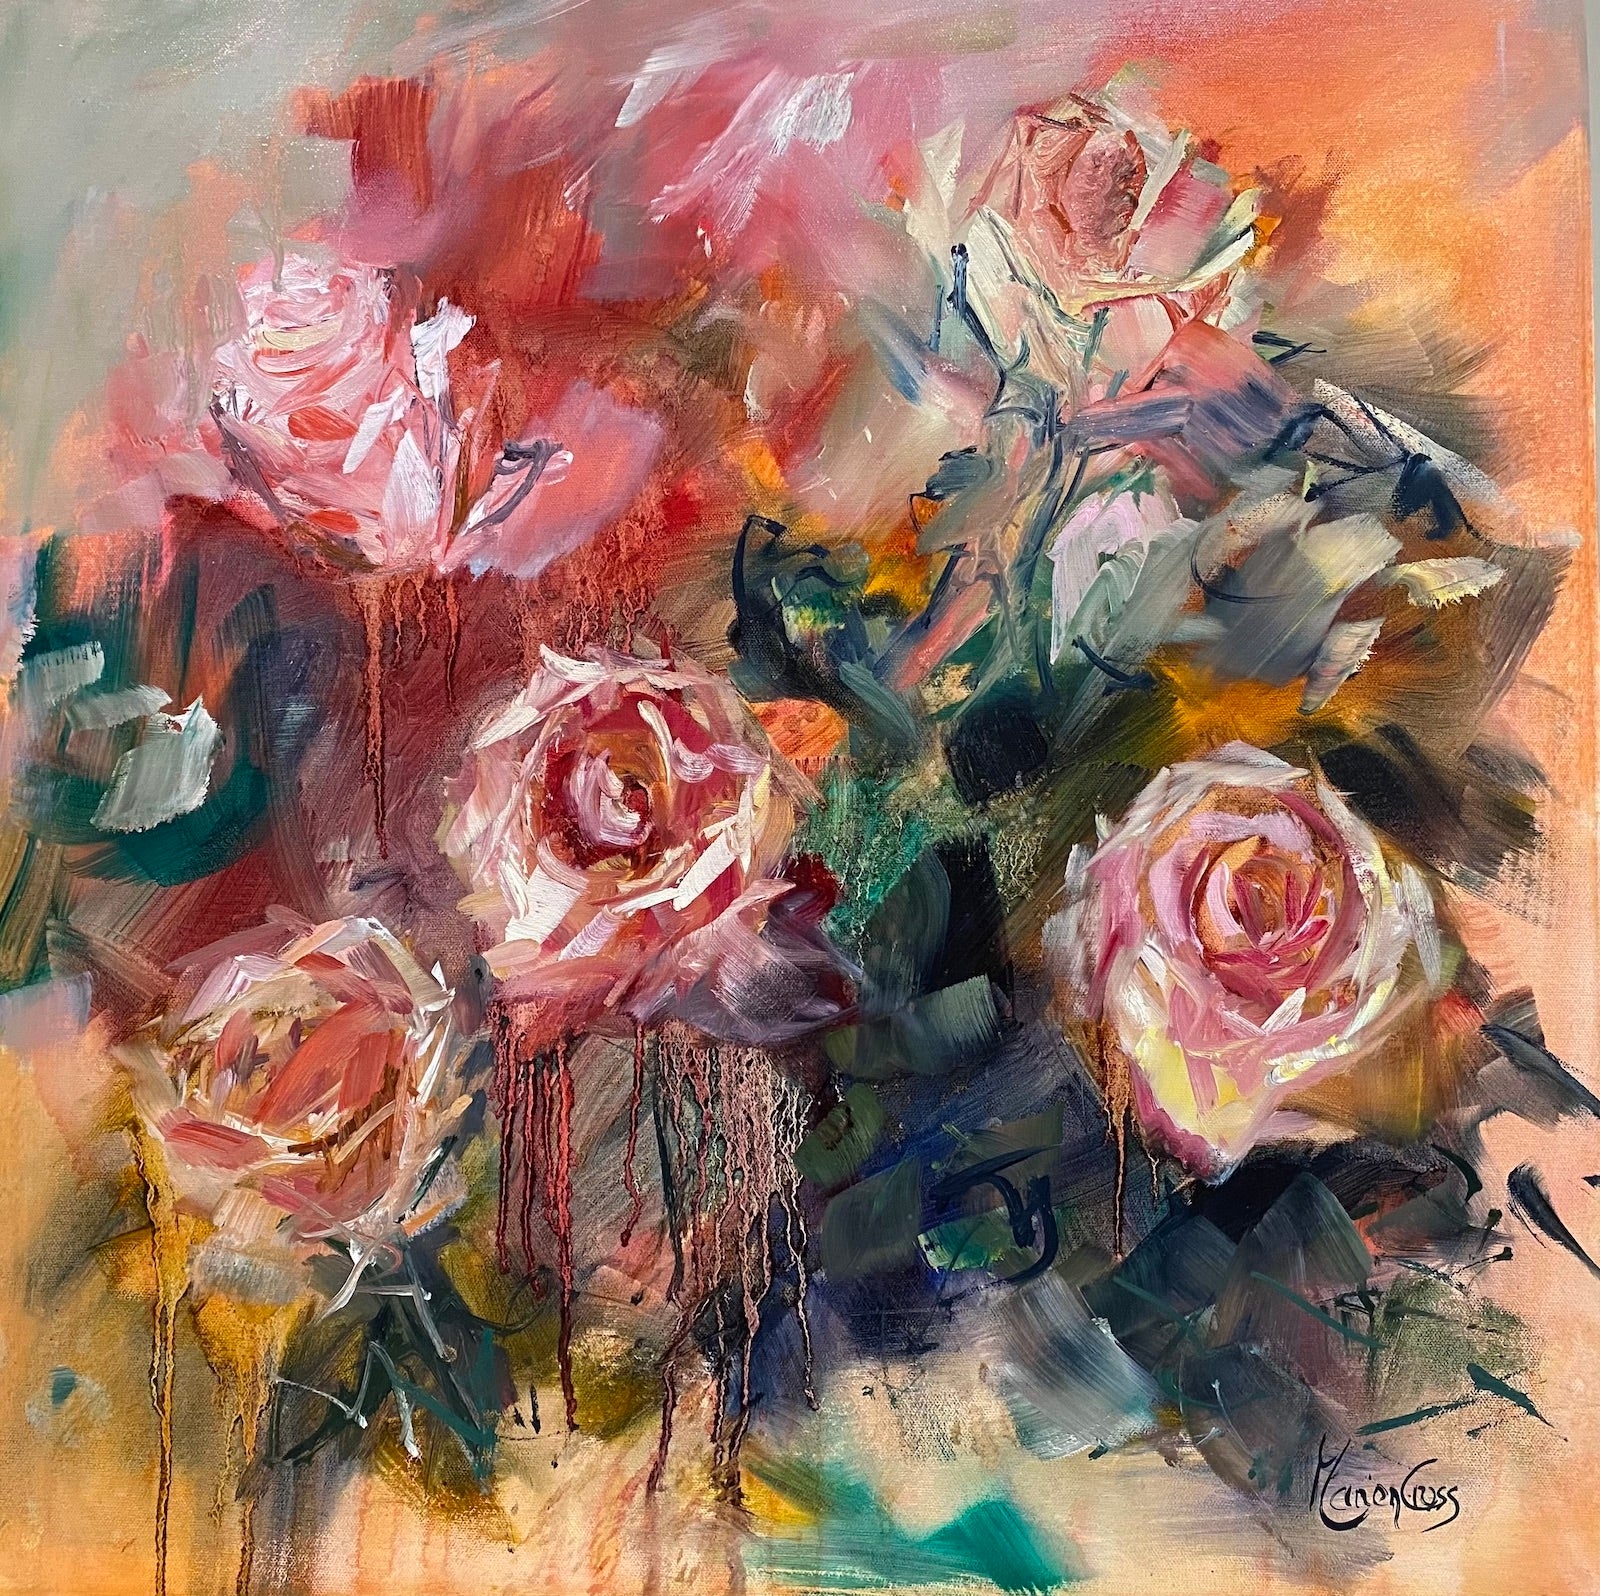 Bed Of Roses 2 - ORIGINAL PAINTING